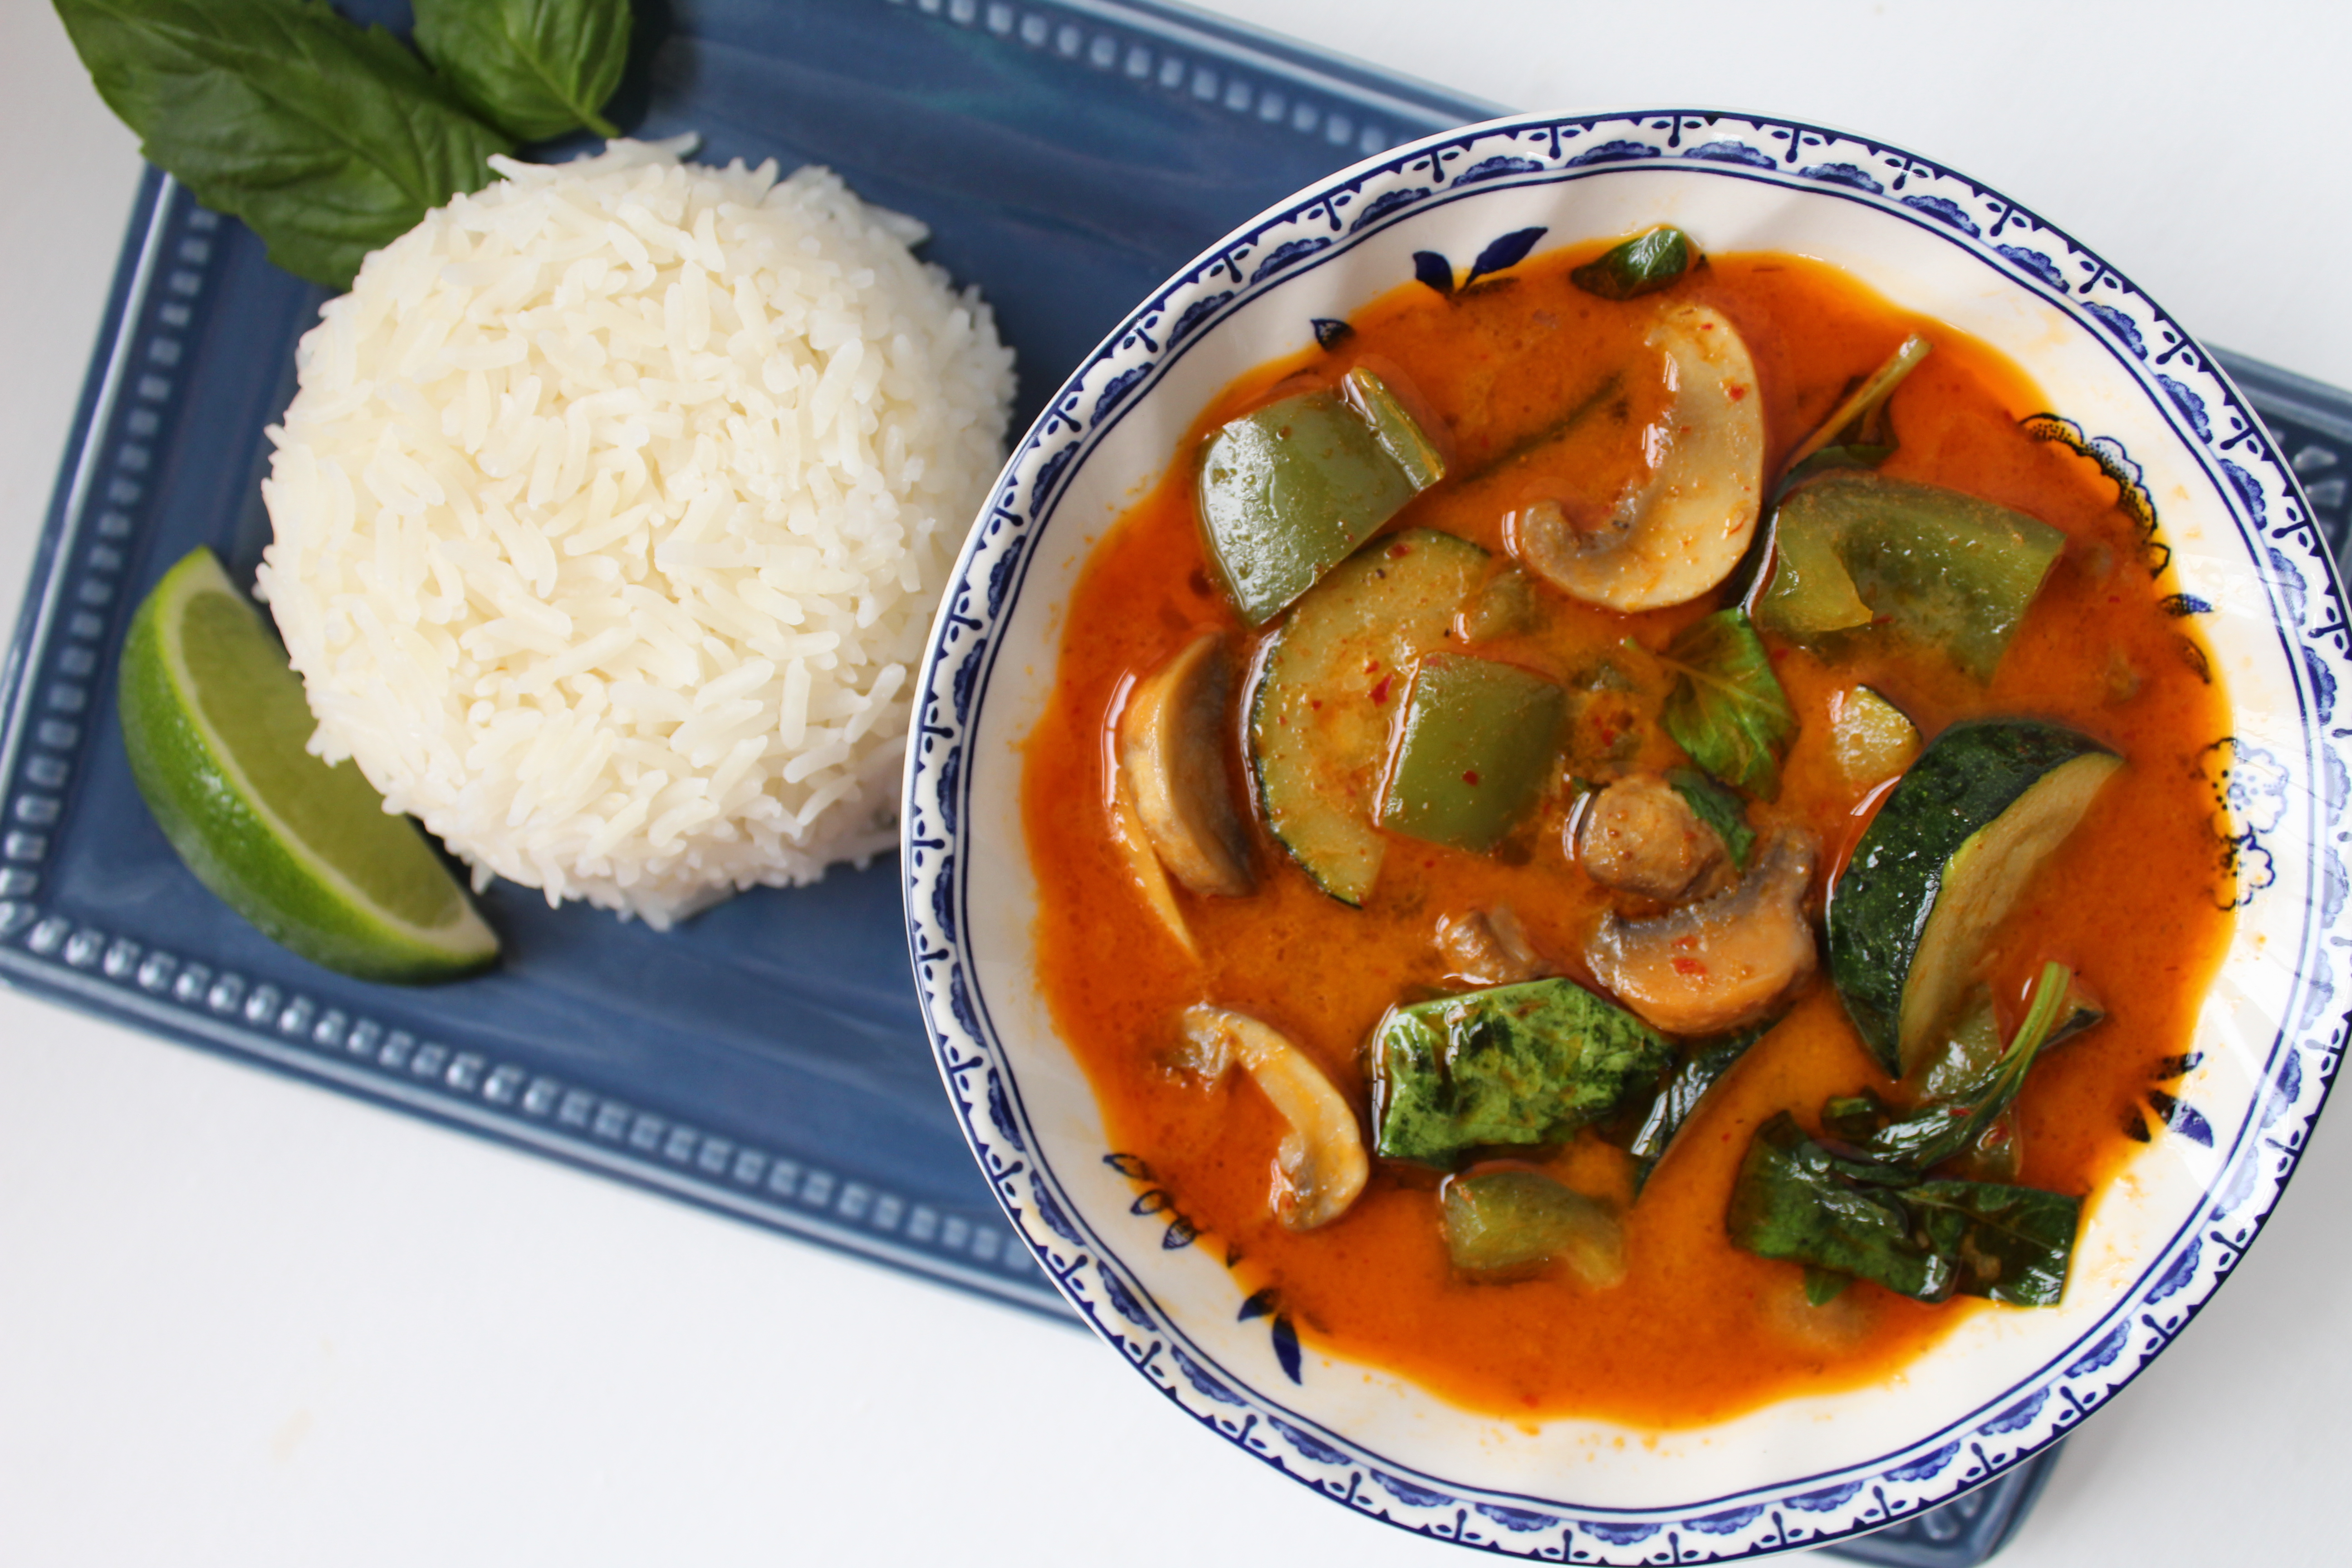 This bold and flavorful curry recipe is full of vegetables and comes together in about 30 minutes, making it a great choice for a weeknight dinner.